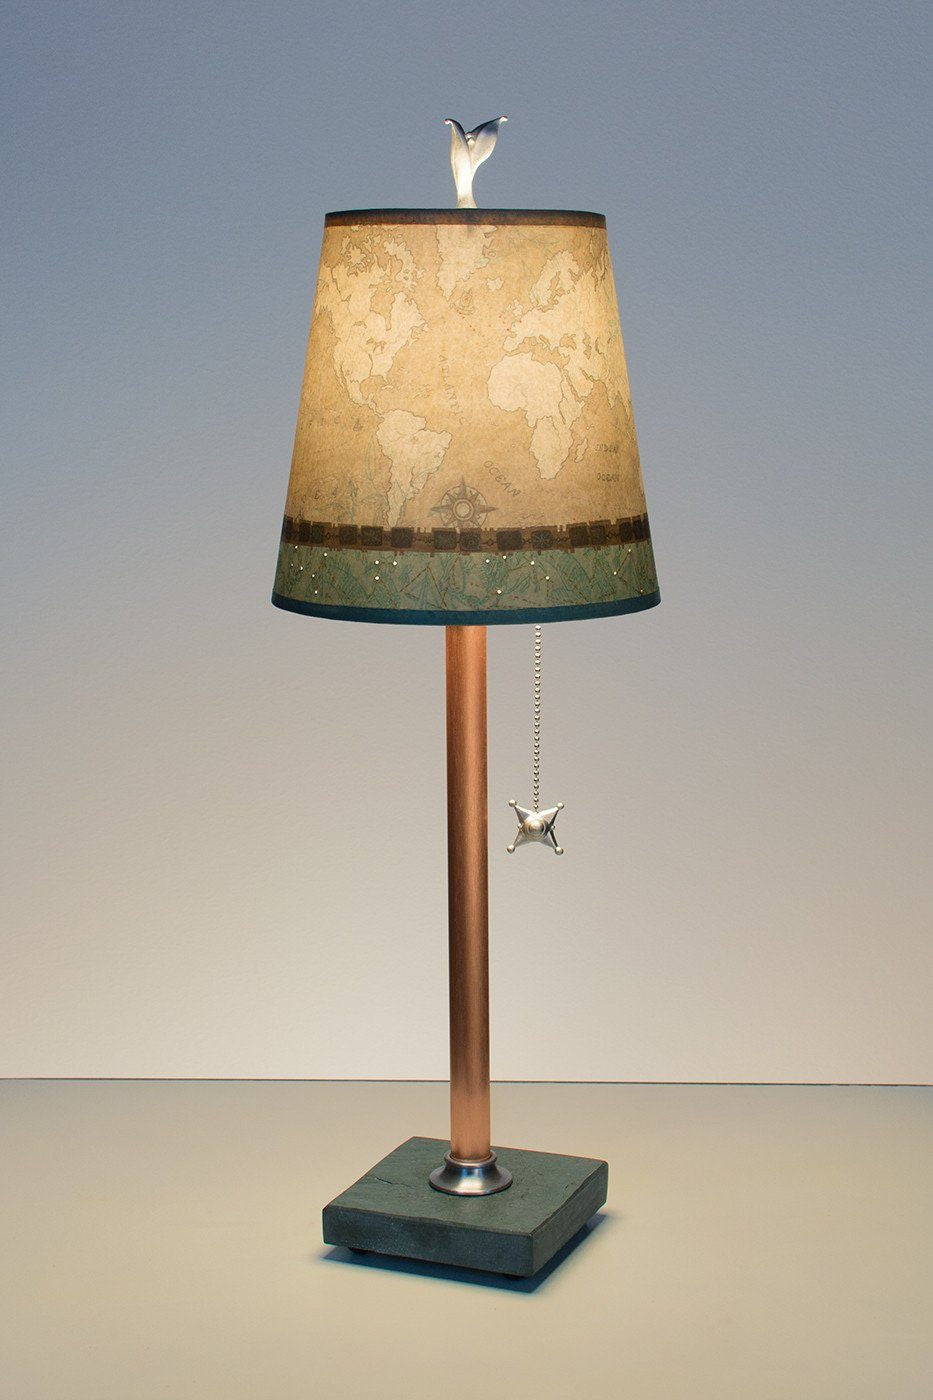 Janna Ugone & Co Table Lamps Copper Table Lamp with Small Drum Shade in Voyages